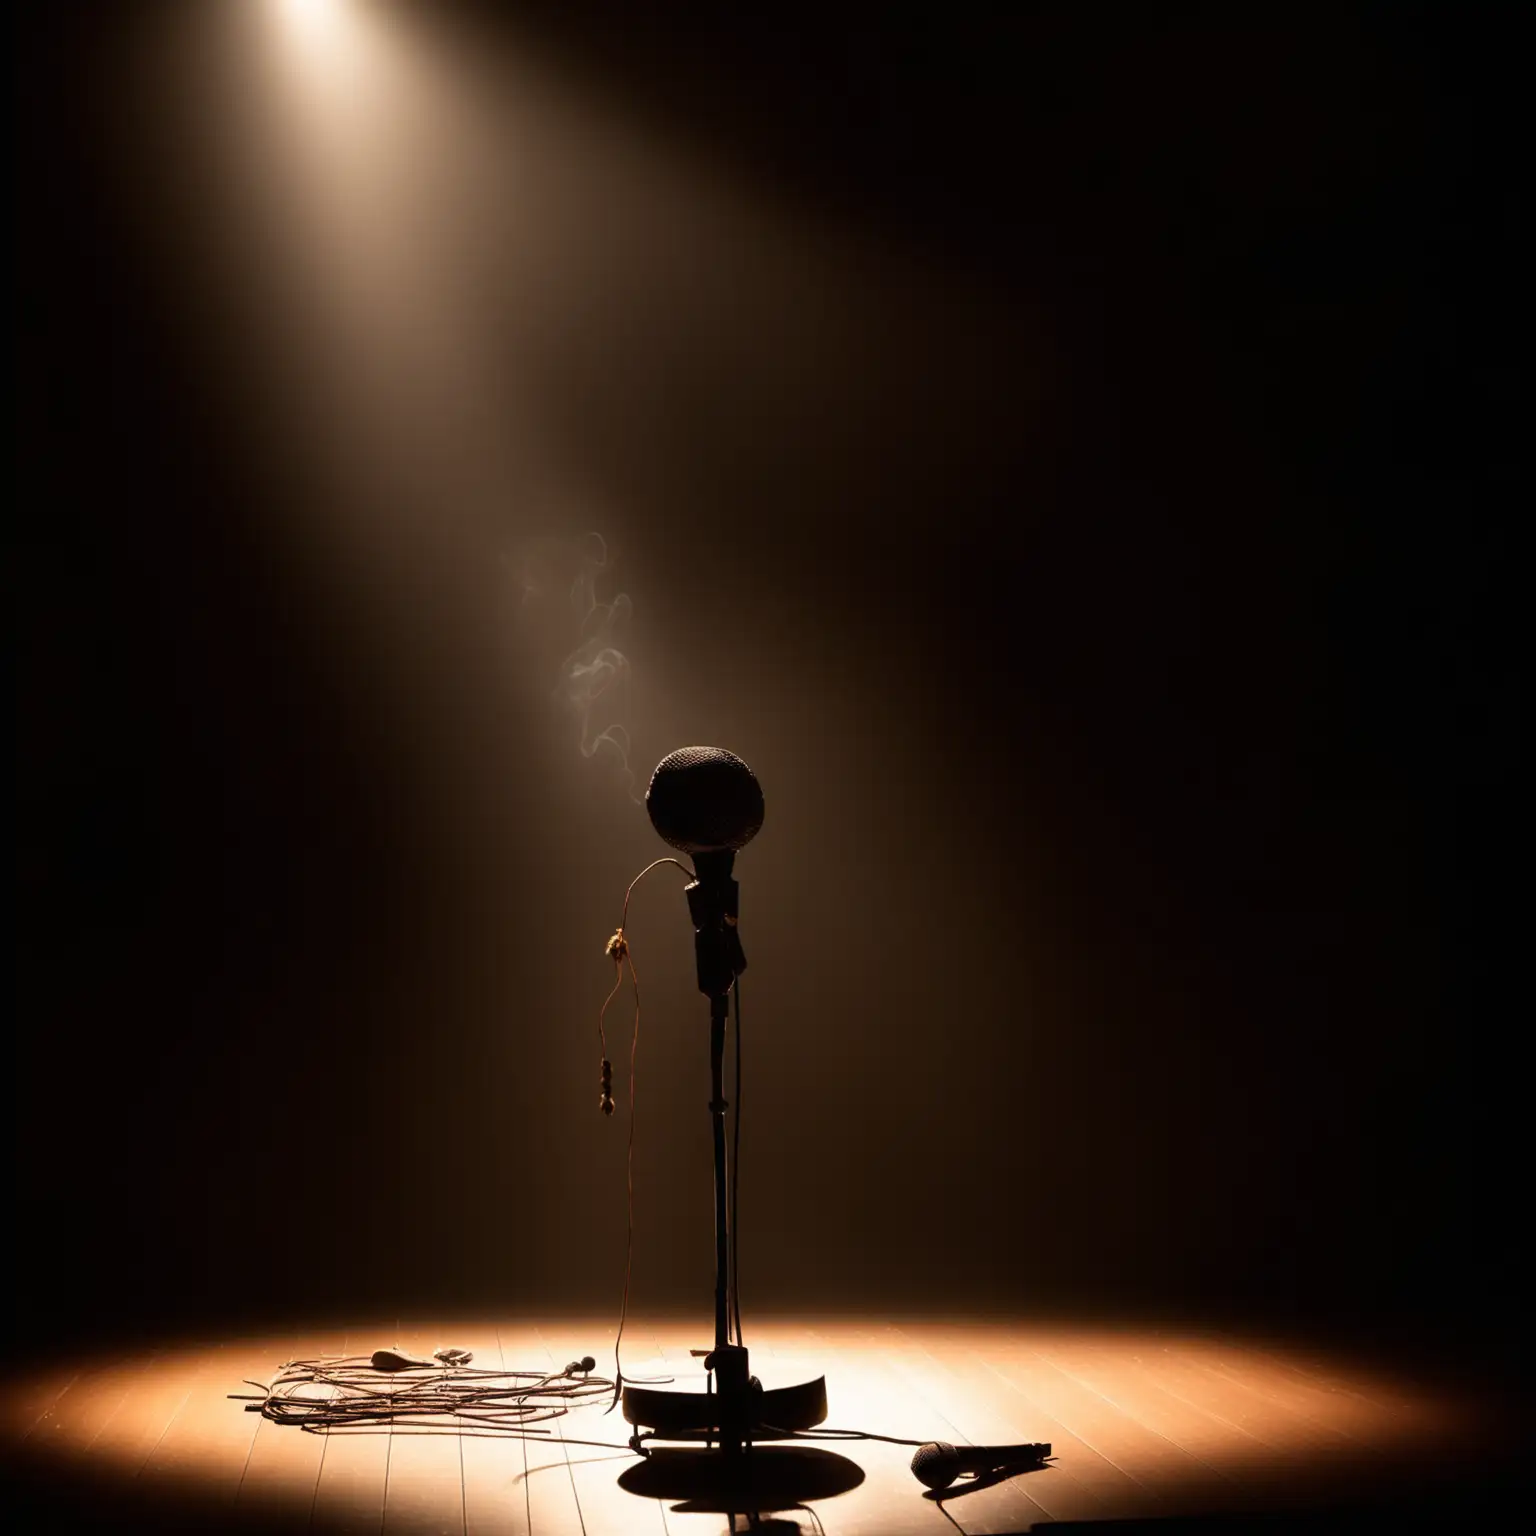  A hush hangs heavy in the dimly lit African American spoken word club. The air shimmers with wisps of incense smoke, their fragrant tendrils illuminated by shafts of colored light that pierce the darkness. Center stage, a lone microphone bathed in a stark spotlight stands poised and expectant. 
